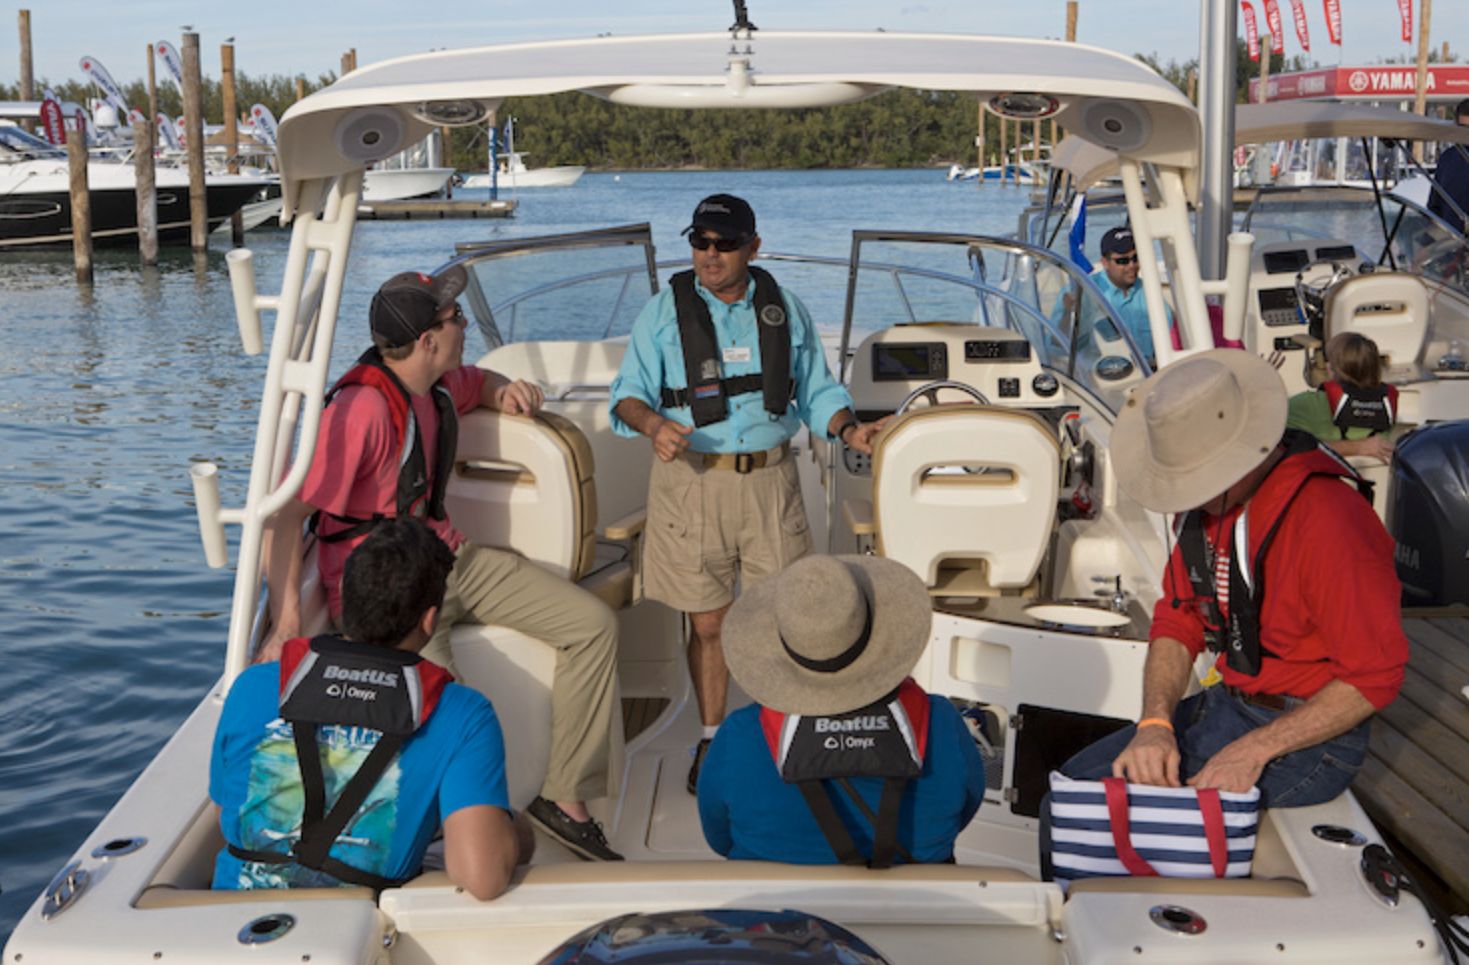 Boating safety, PFD's, Safety Equipment, Safety guide, Discover Boating, Safety Checklist